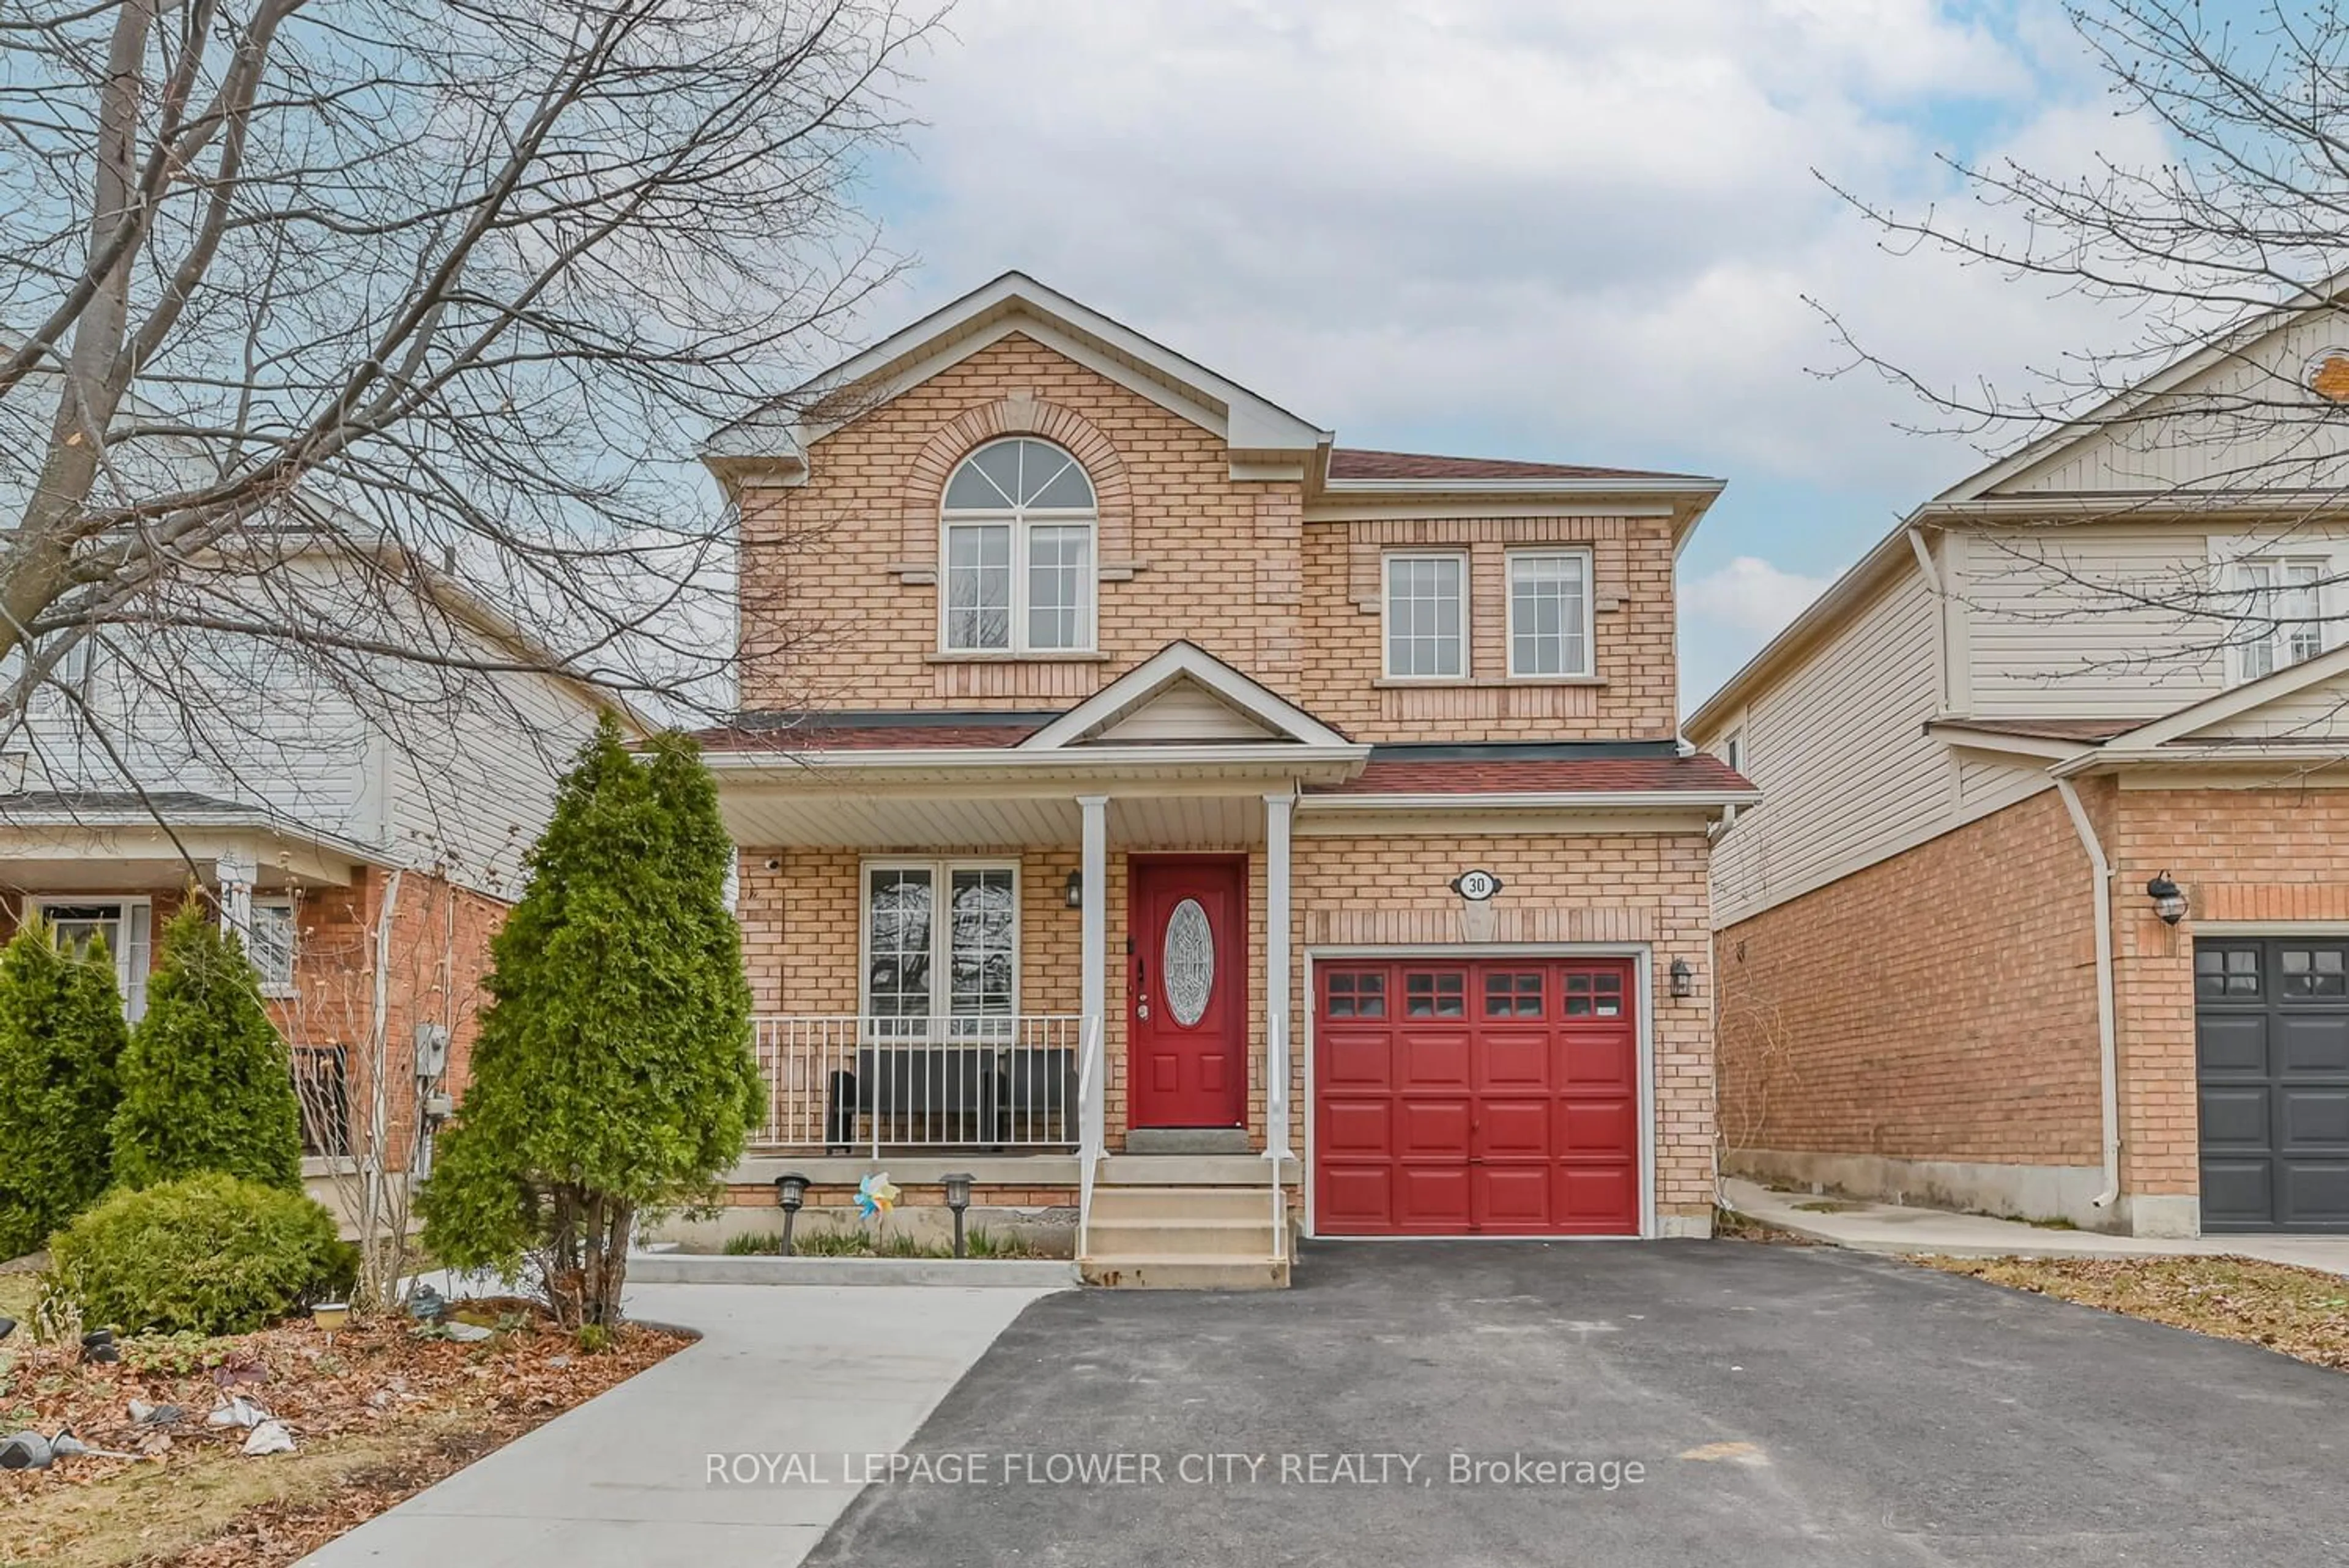 Home with brick exterior material for 30 Heathwood Dr, Brampton Ontario L7A 1Y6